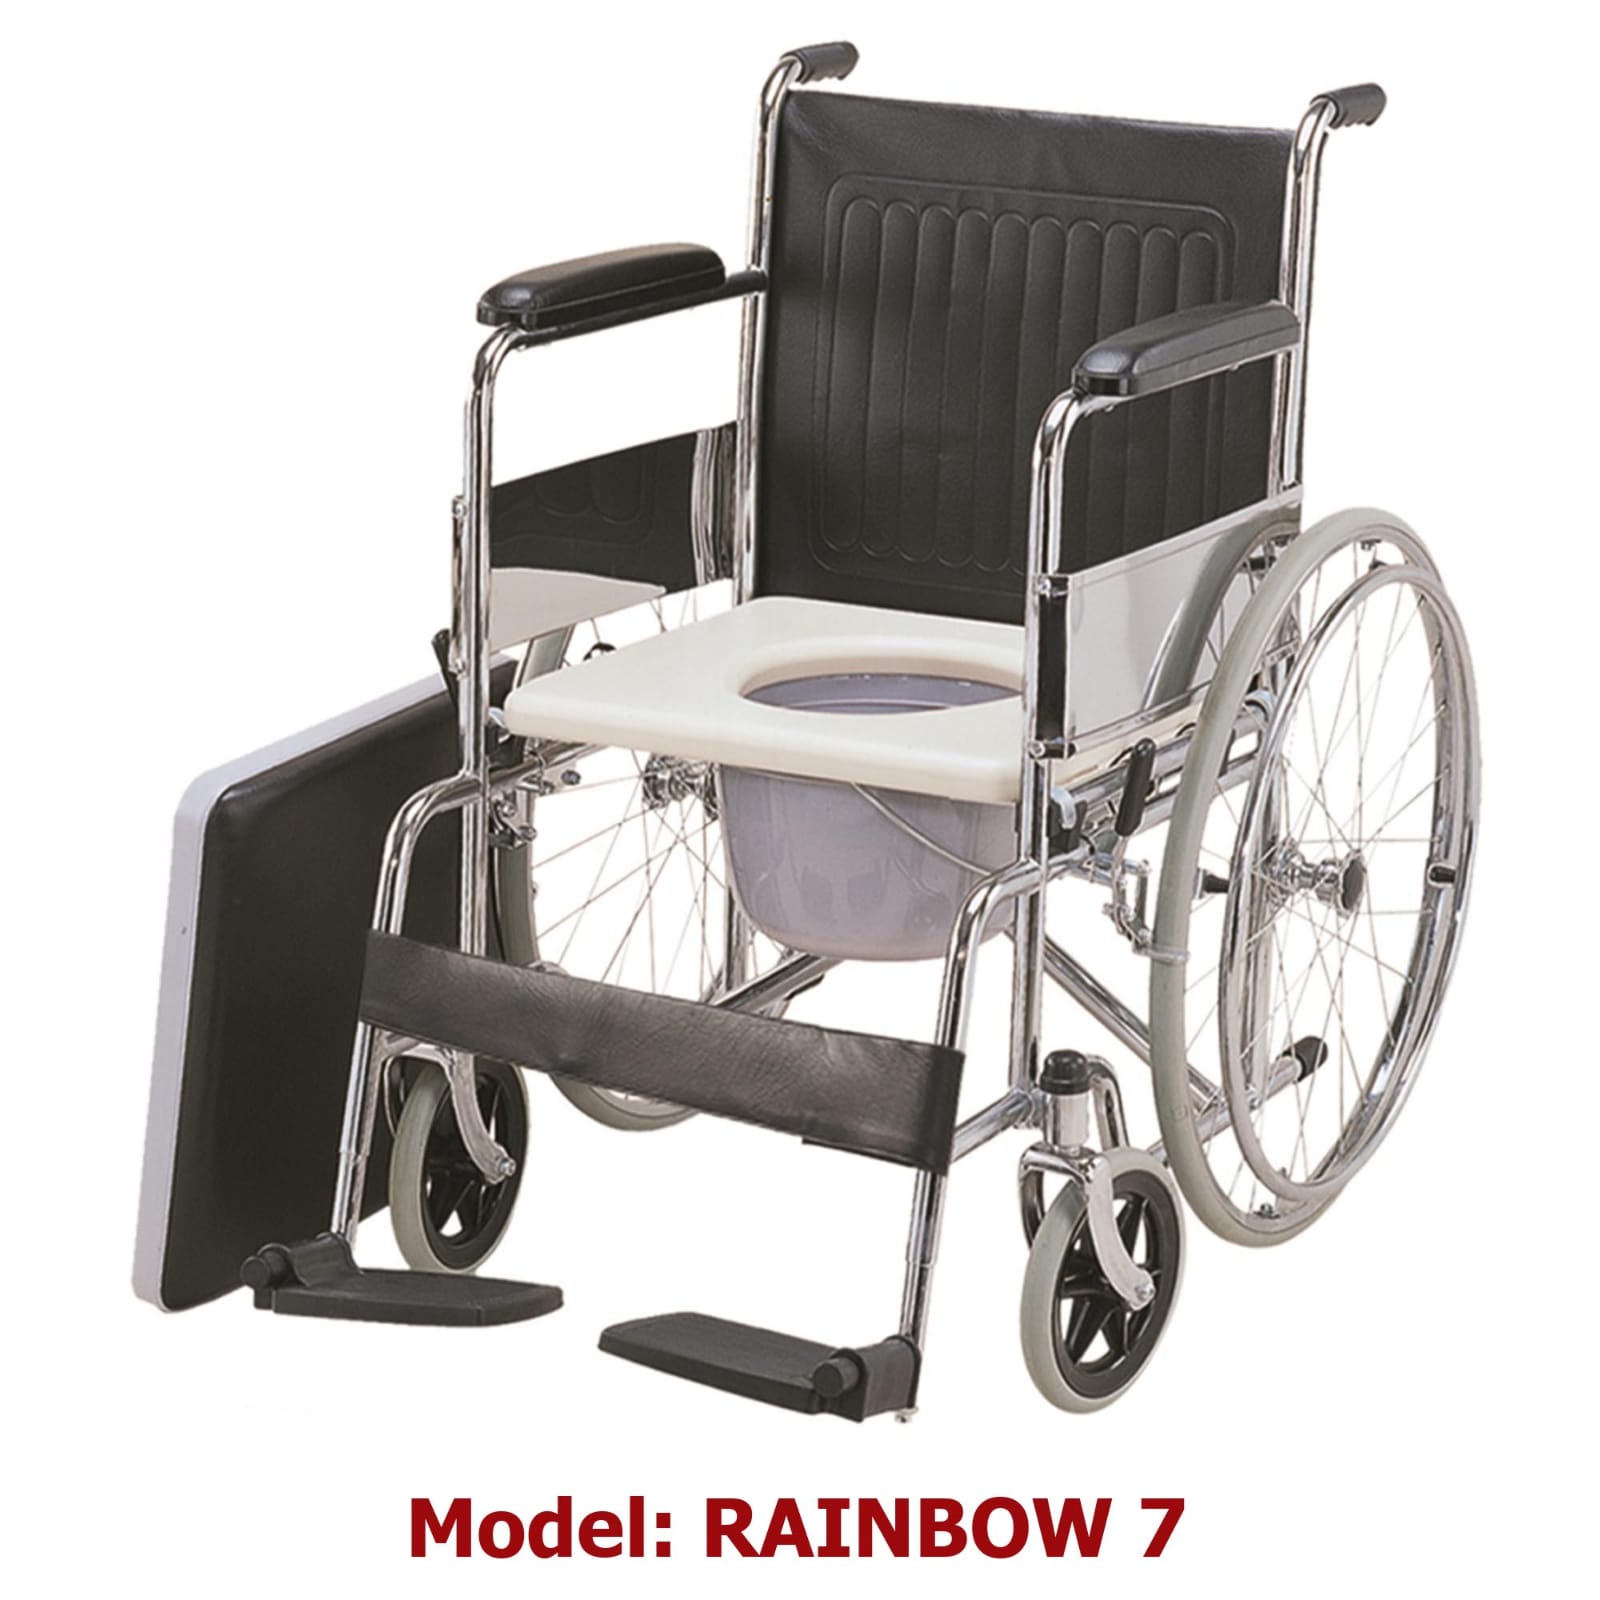 Karma Commode Wheelchair Rainbow 7 On Sale Suppliers, Service Provider in Dilshad garden